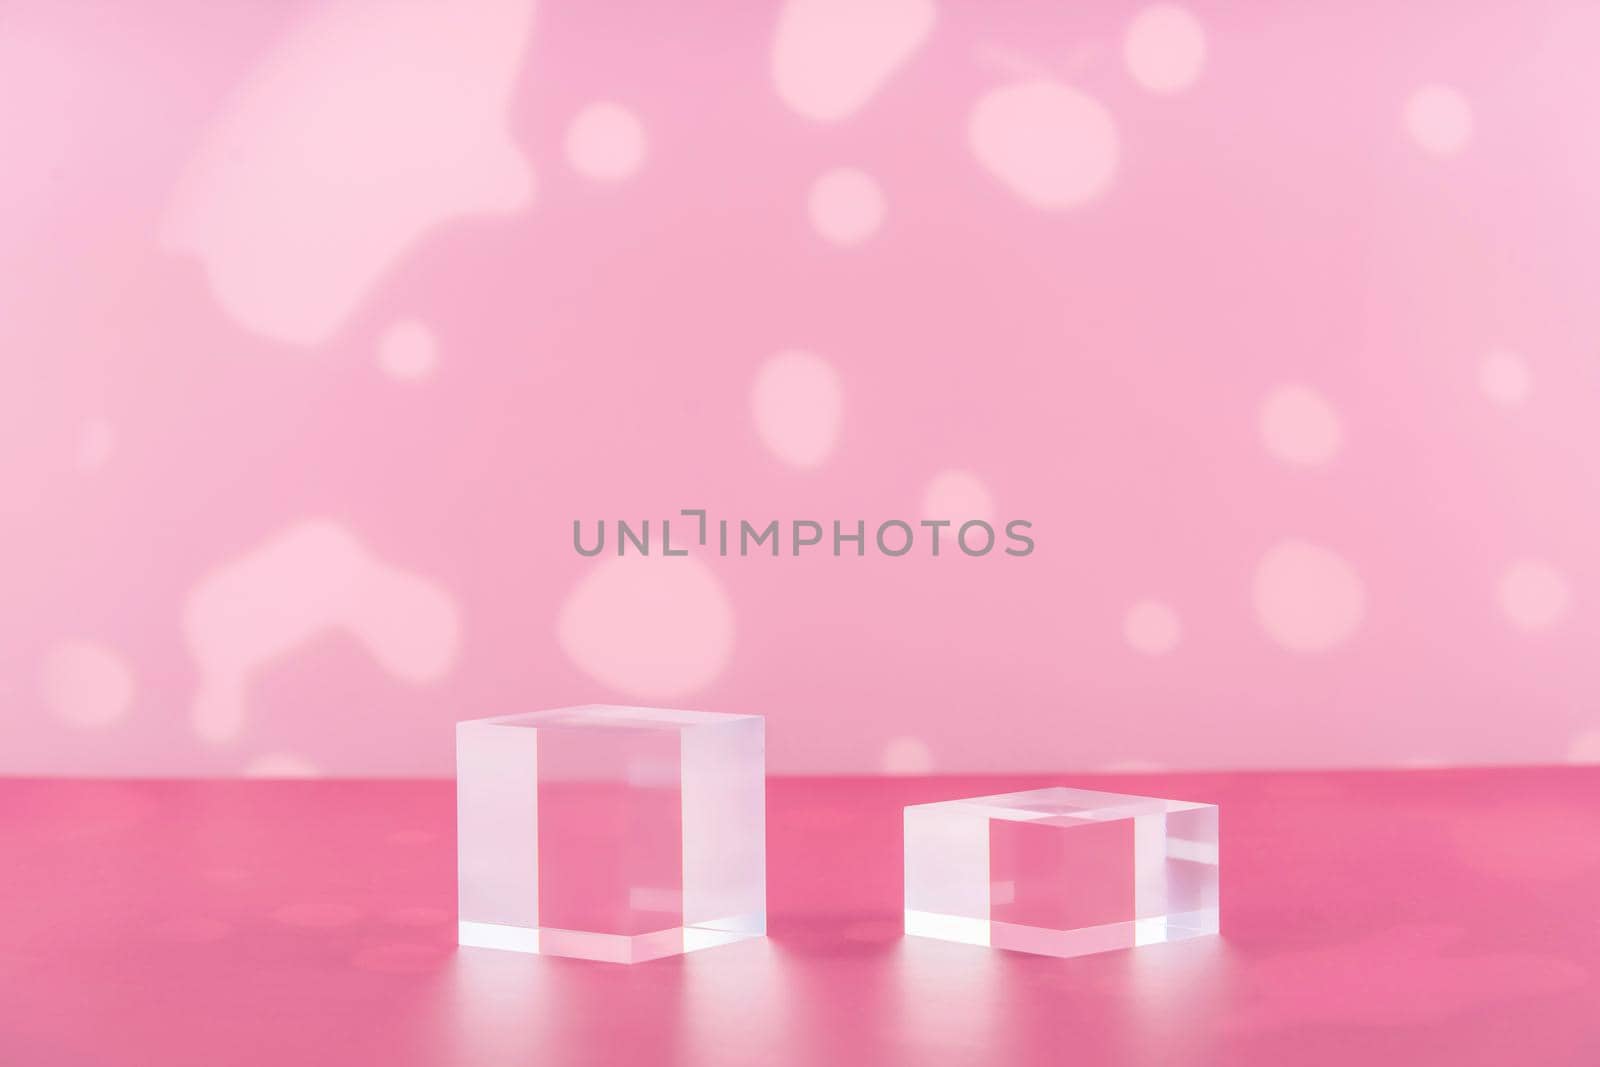 Acrylic blocks on pink background, pedestal cosmetic display glass podium platform for product presentation, geometric stand for cosmetics, mockup scene for jewellery, cosmetics mock up